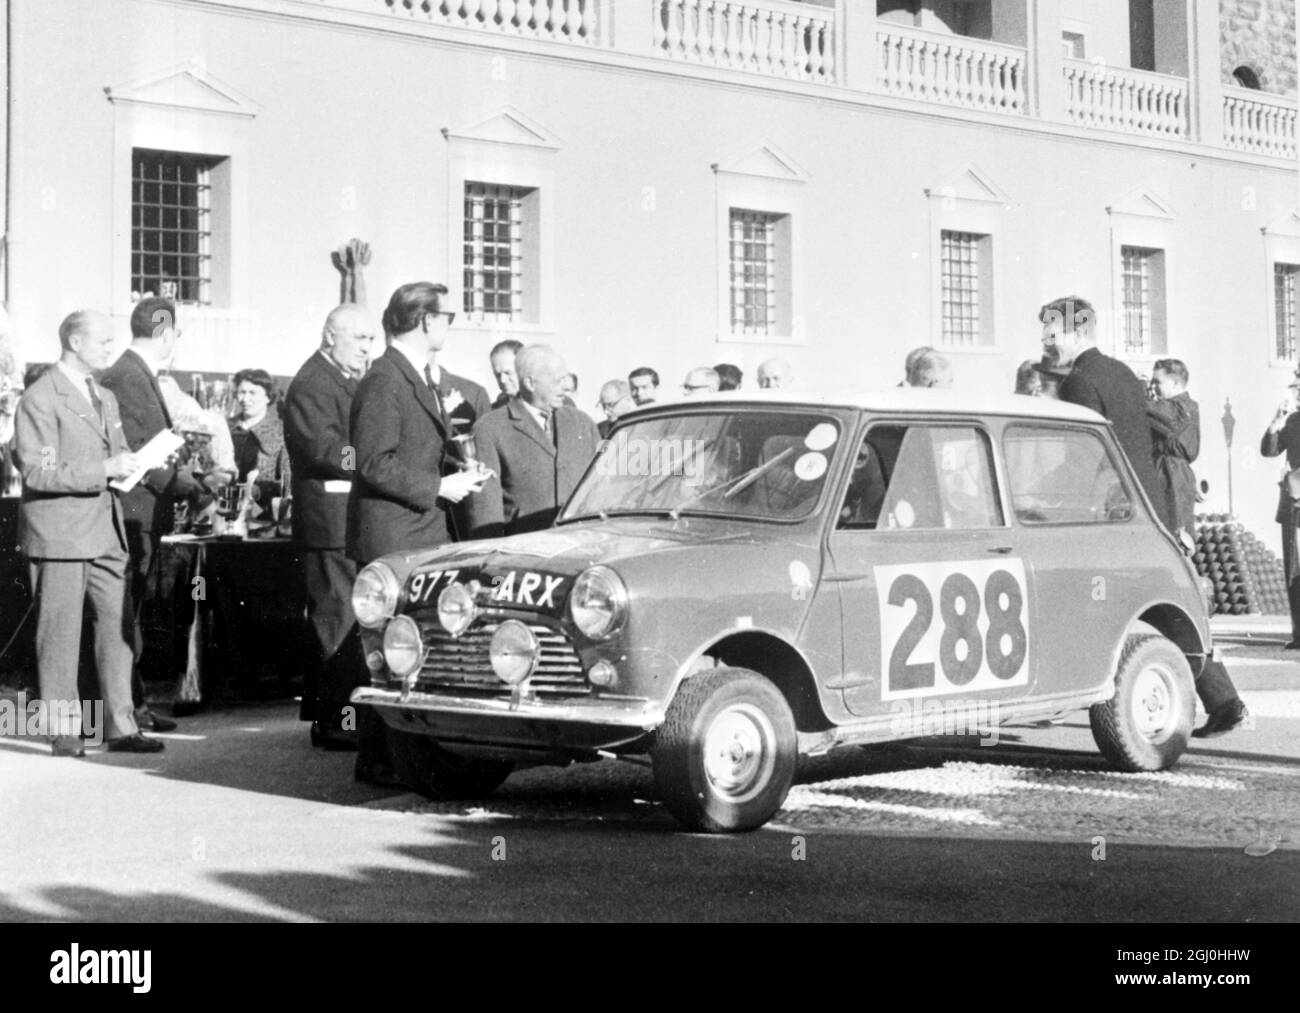 Monte Carlo, Monaco: Morris car 288 and the driver (standing near bonnet, profile, holding cup) and co-driver (at the rear), R Aaltonen and T. Ambrose of Finland, are pictured after the presentation ceremony of the Monte Carlo Rally here on January 26th. 283 January 1963 Stock Photo